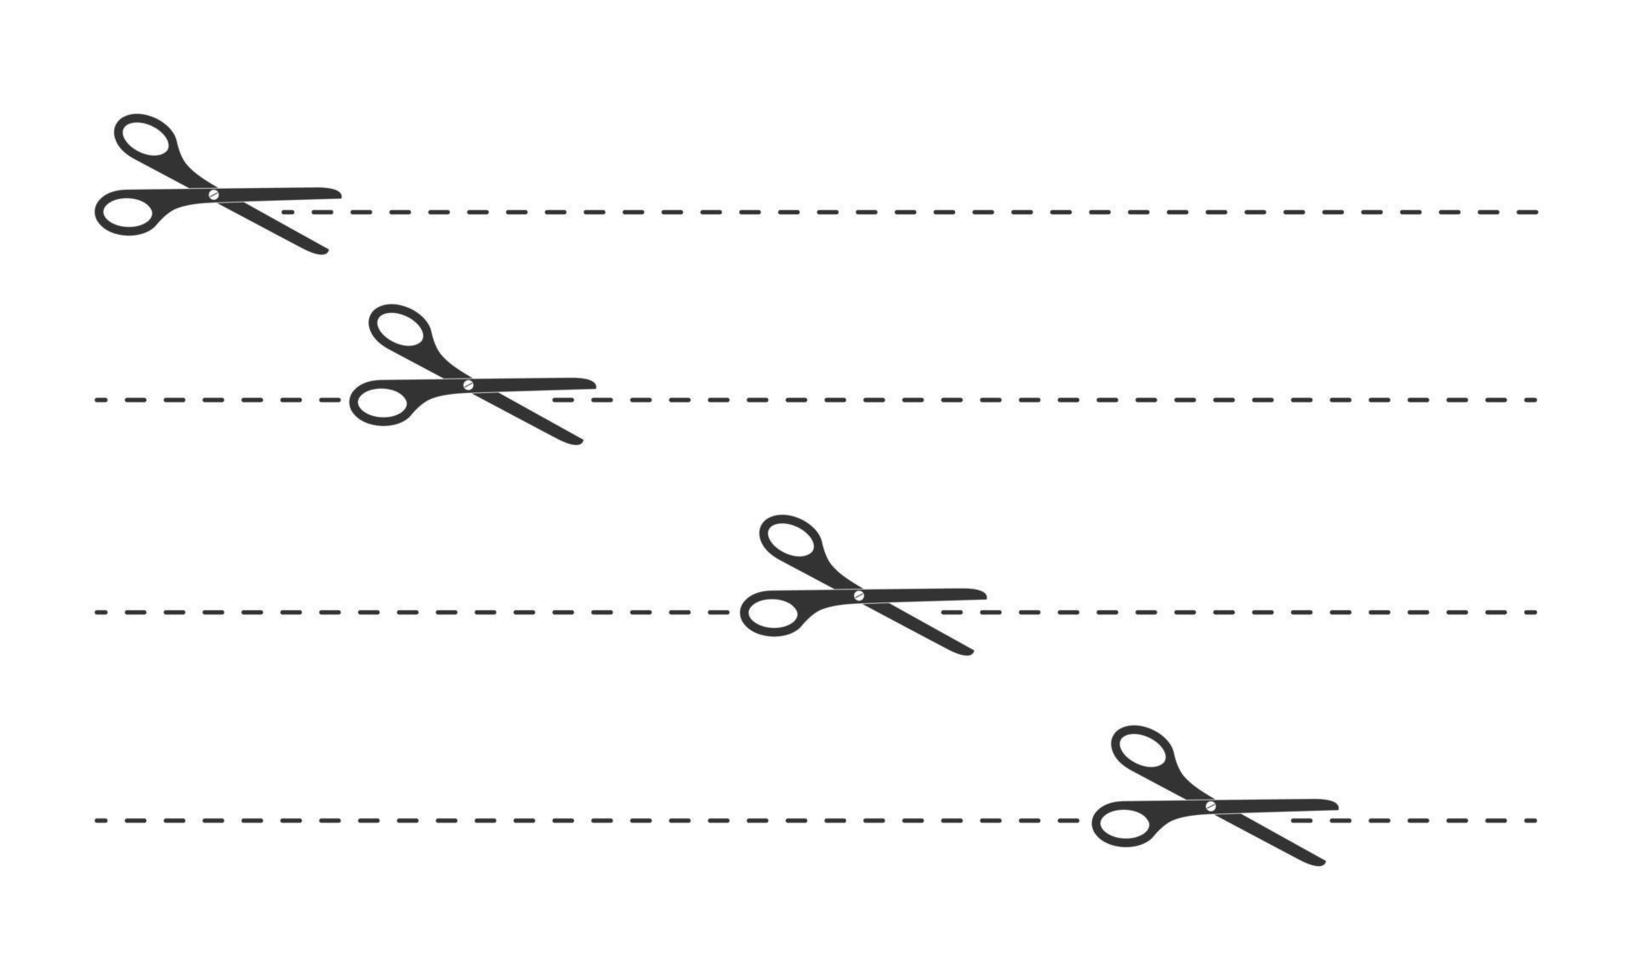 Set of cutting scissors icons with dotted lines. Cut here pictogram for coupons, vouchers, labels, paper pages vector